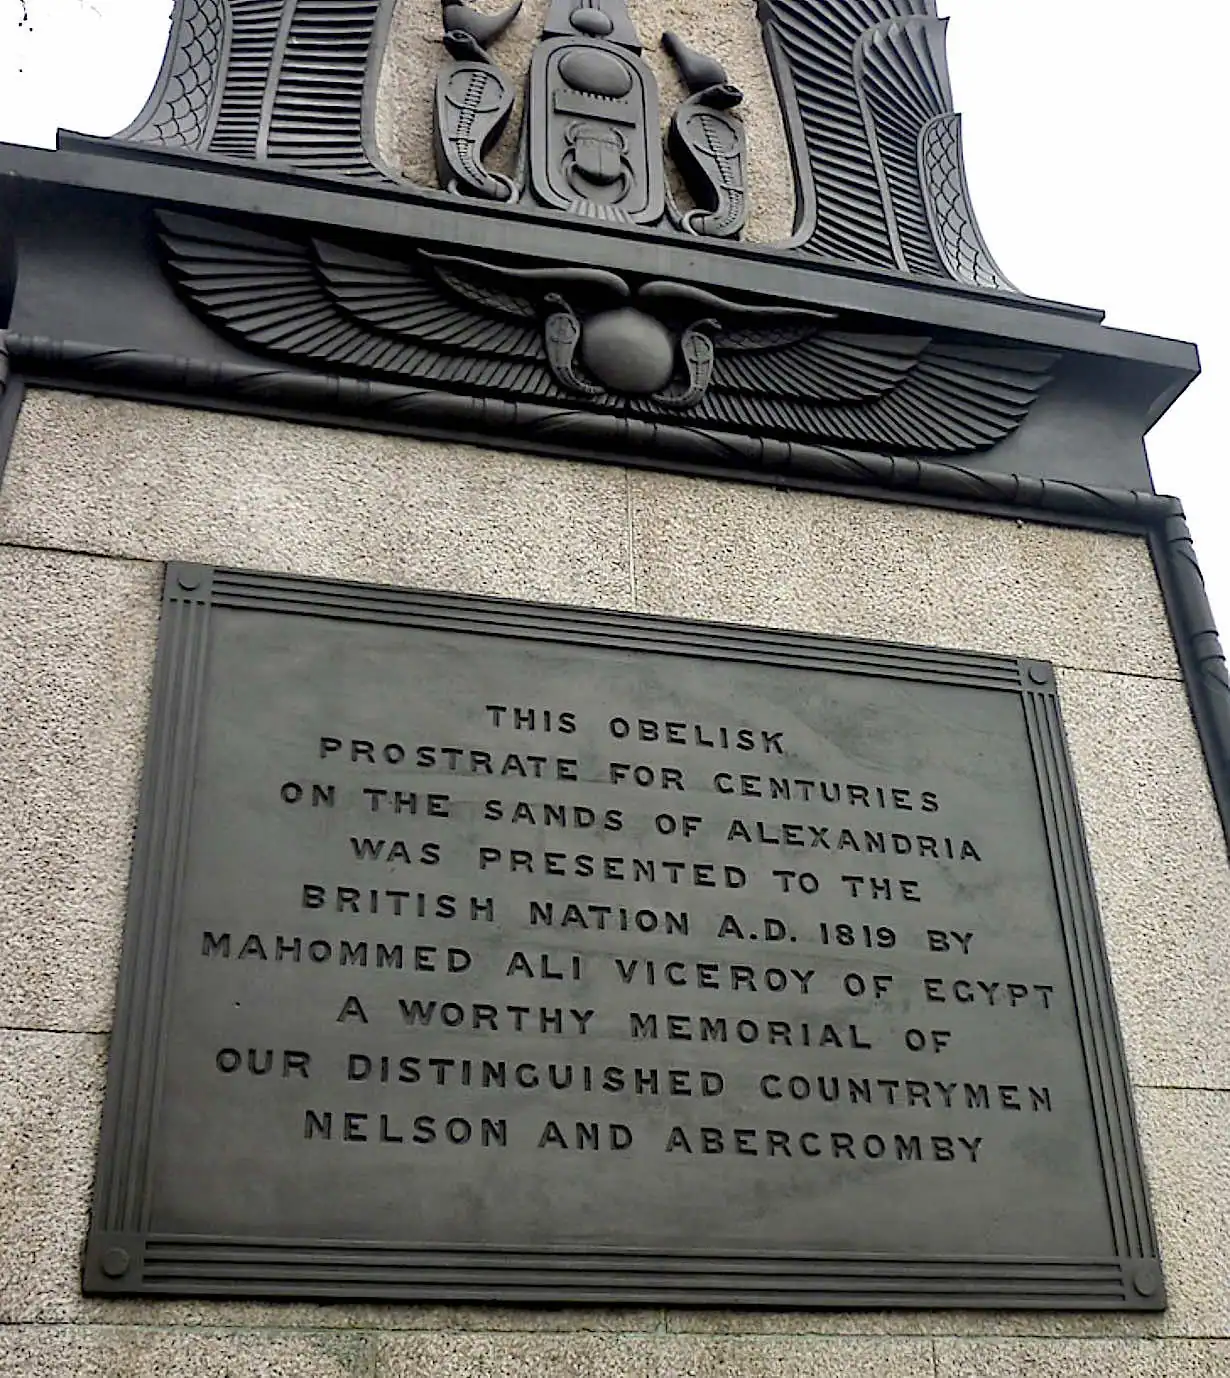 Plaque describing why Egypt gave Britain the Needle